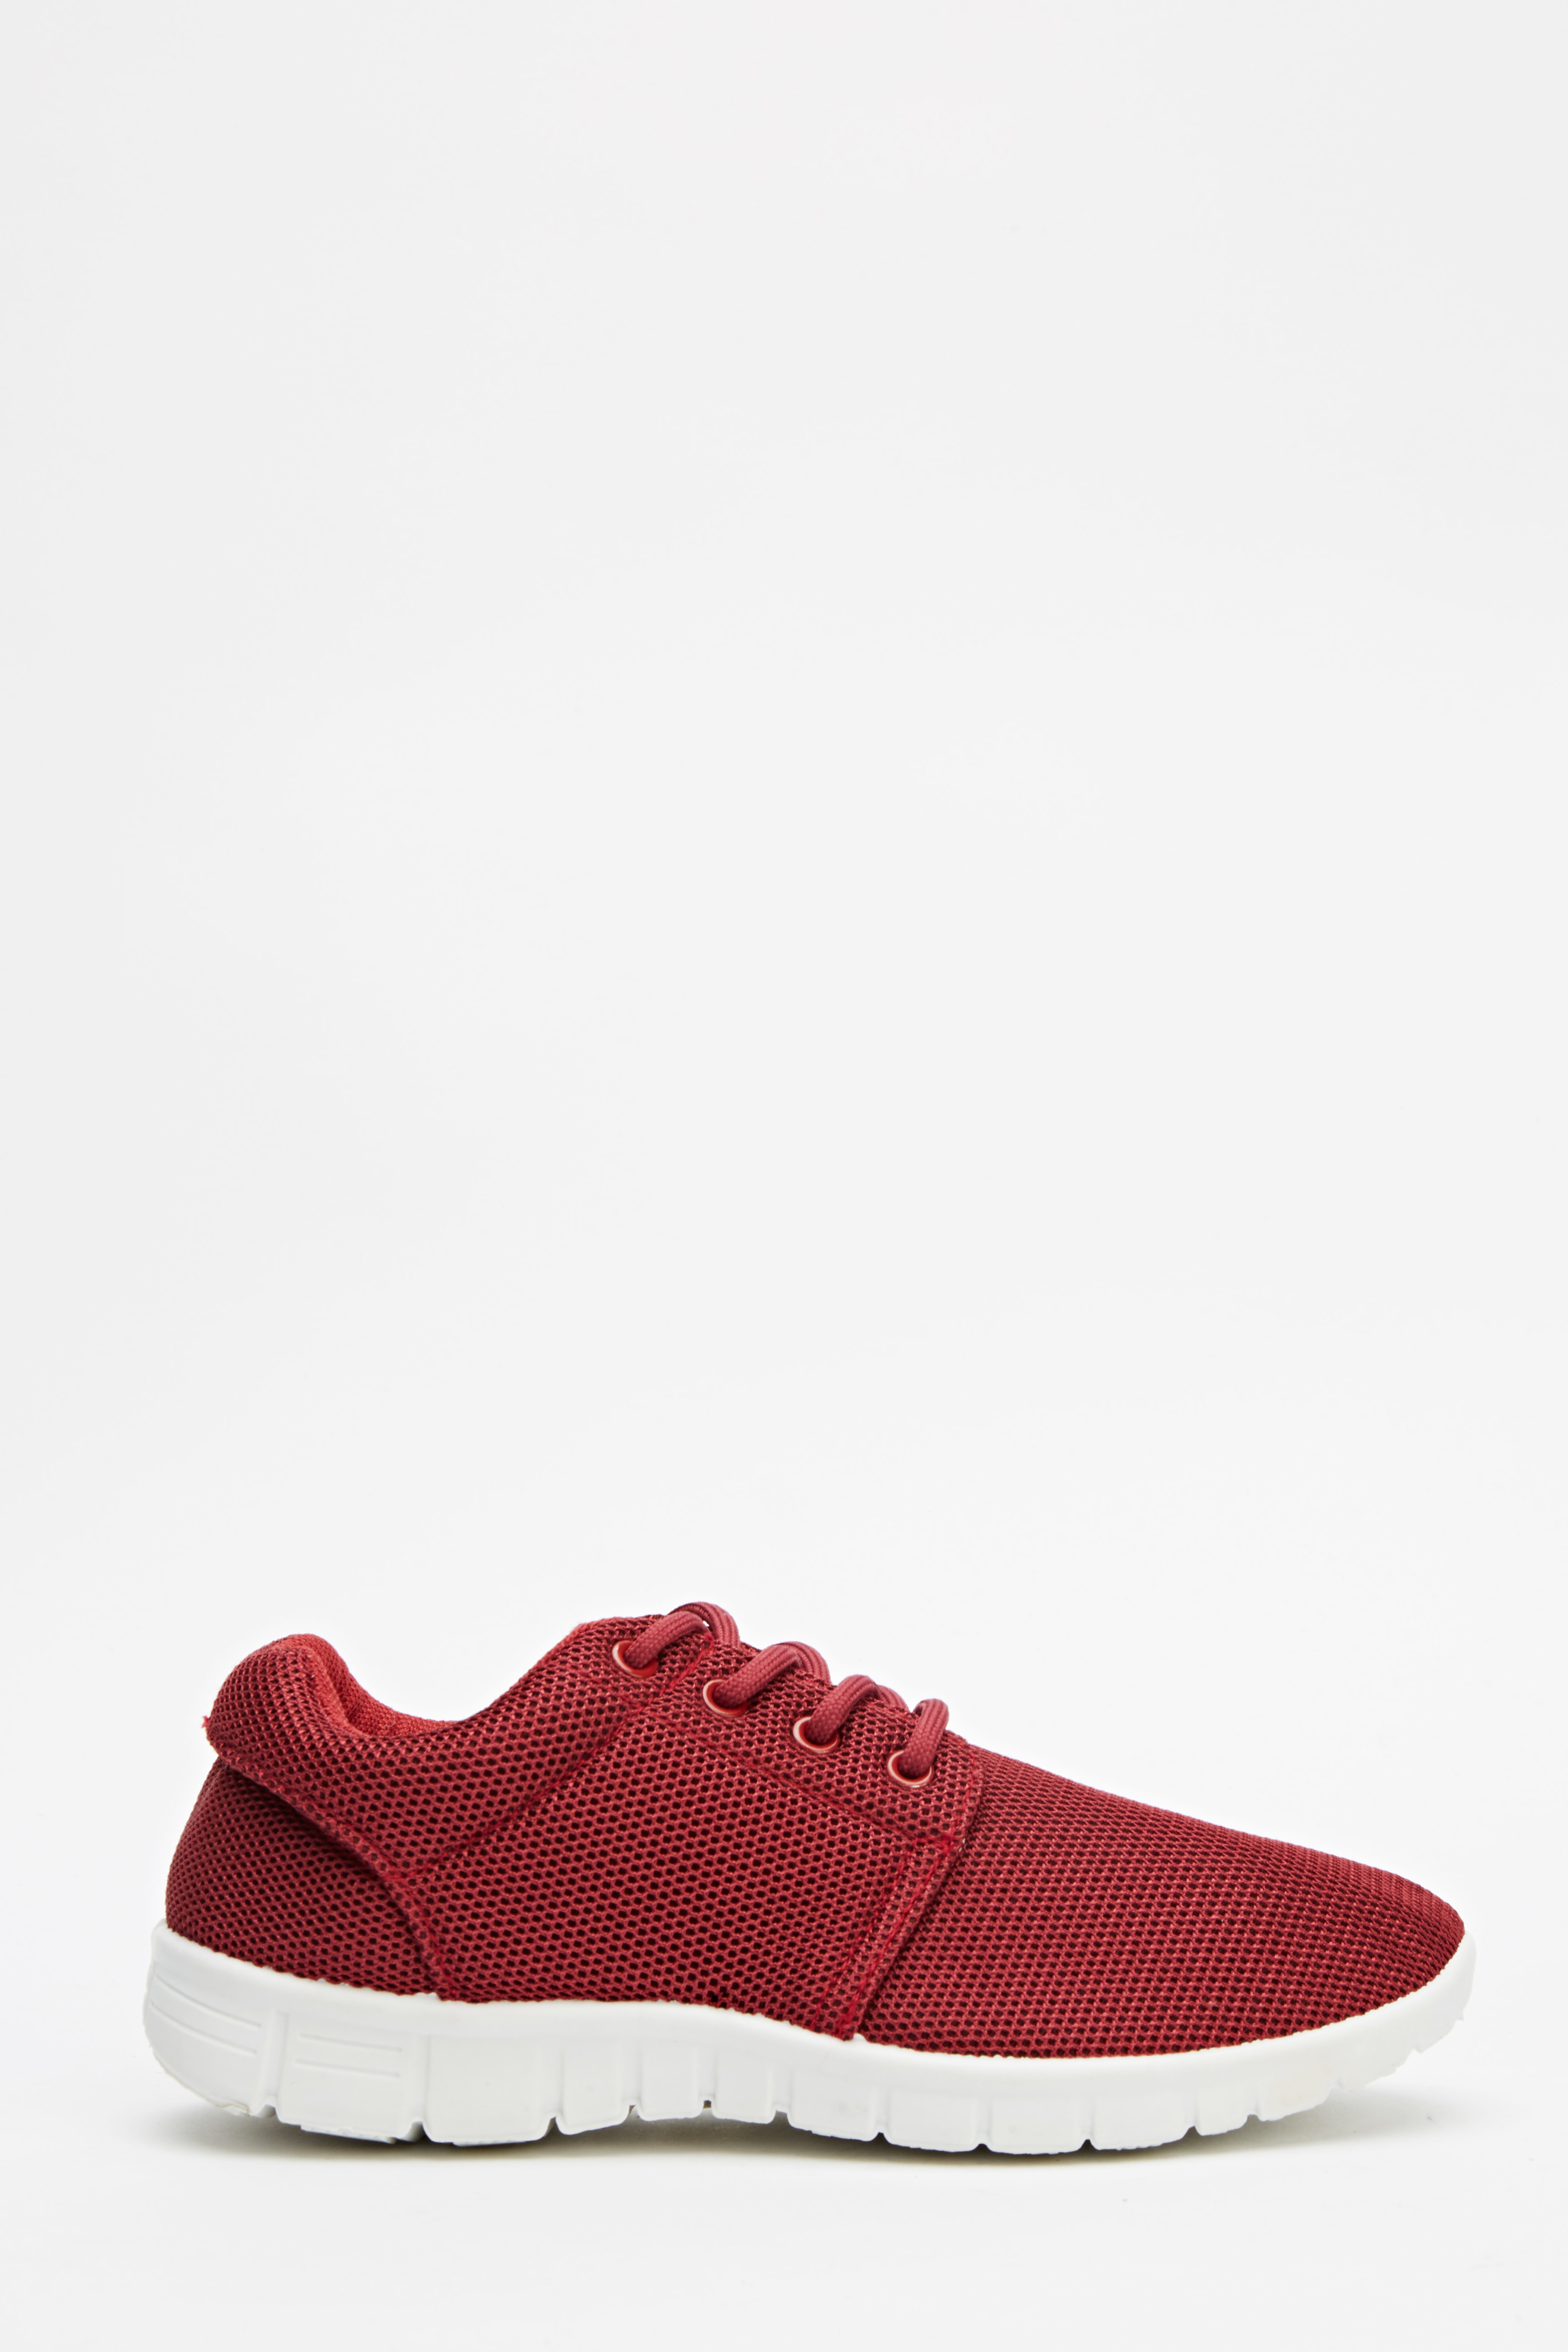 Contrast Low Top Trainers - Just £5